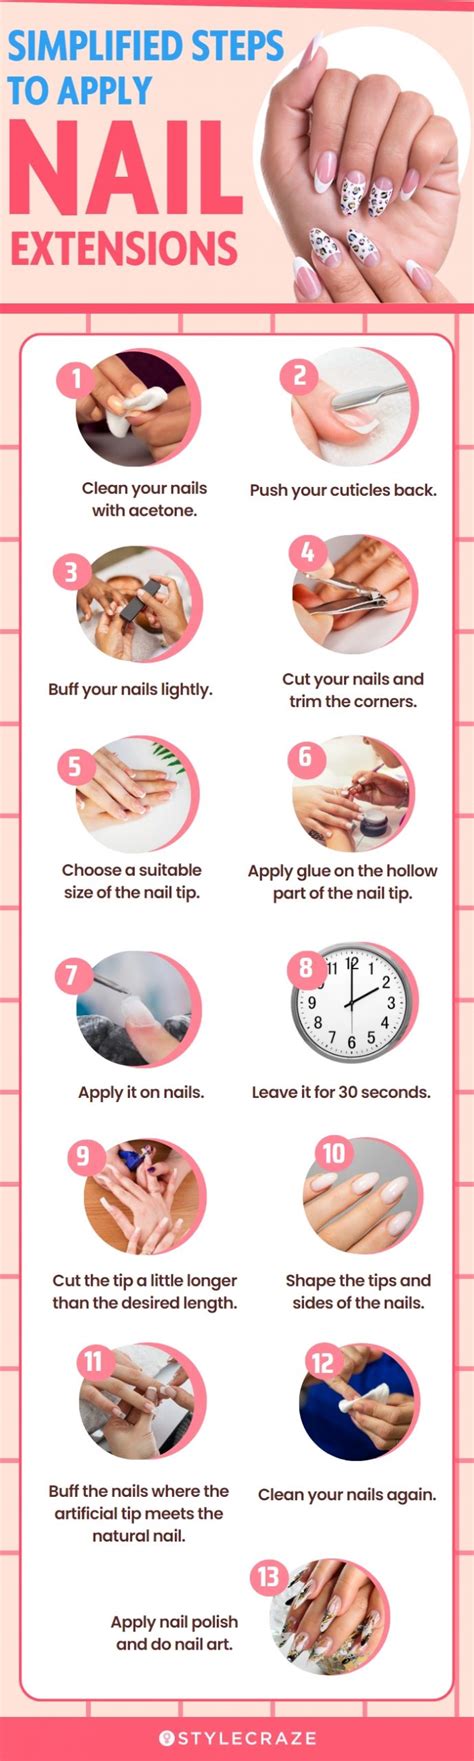 Magical Nail Care Tips and Tricks with MDFIELS